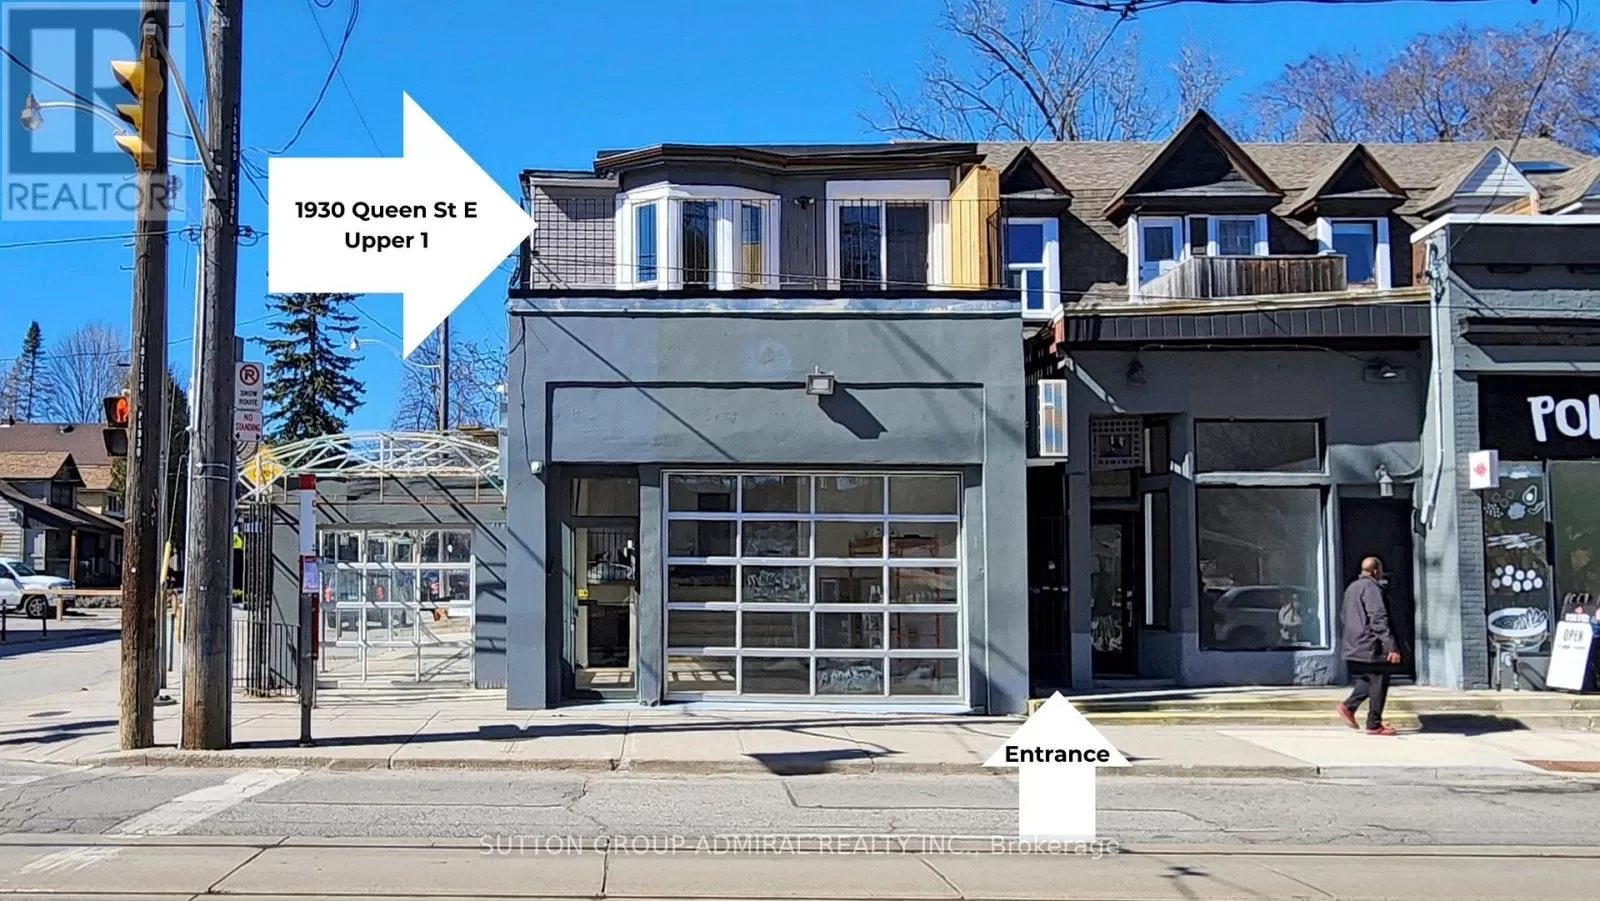 Other for rent: Upper 1 - 1930 Queen Street E, Toronto, Ontario M4L 1H6